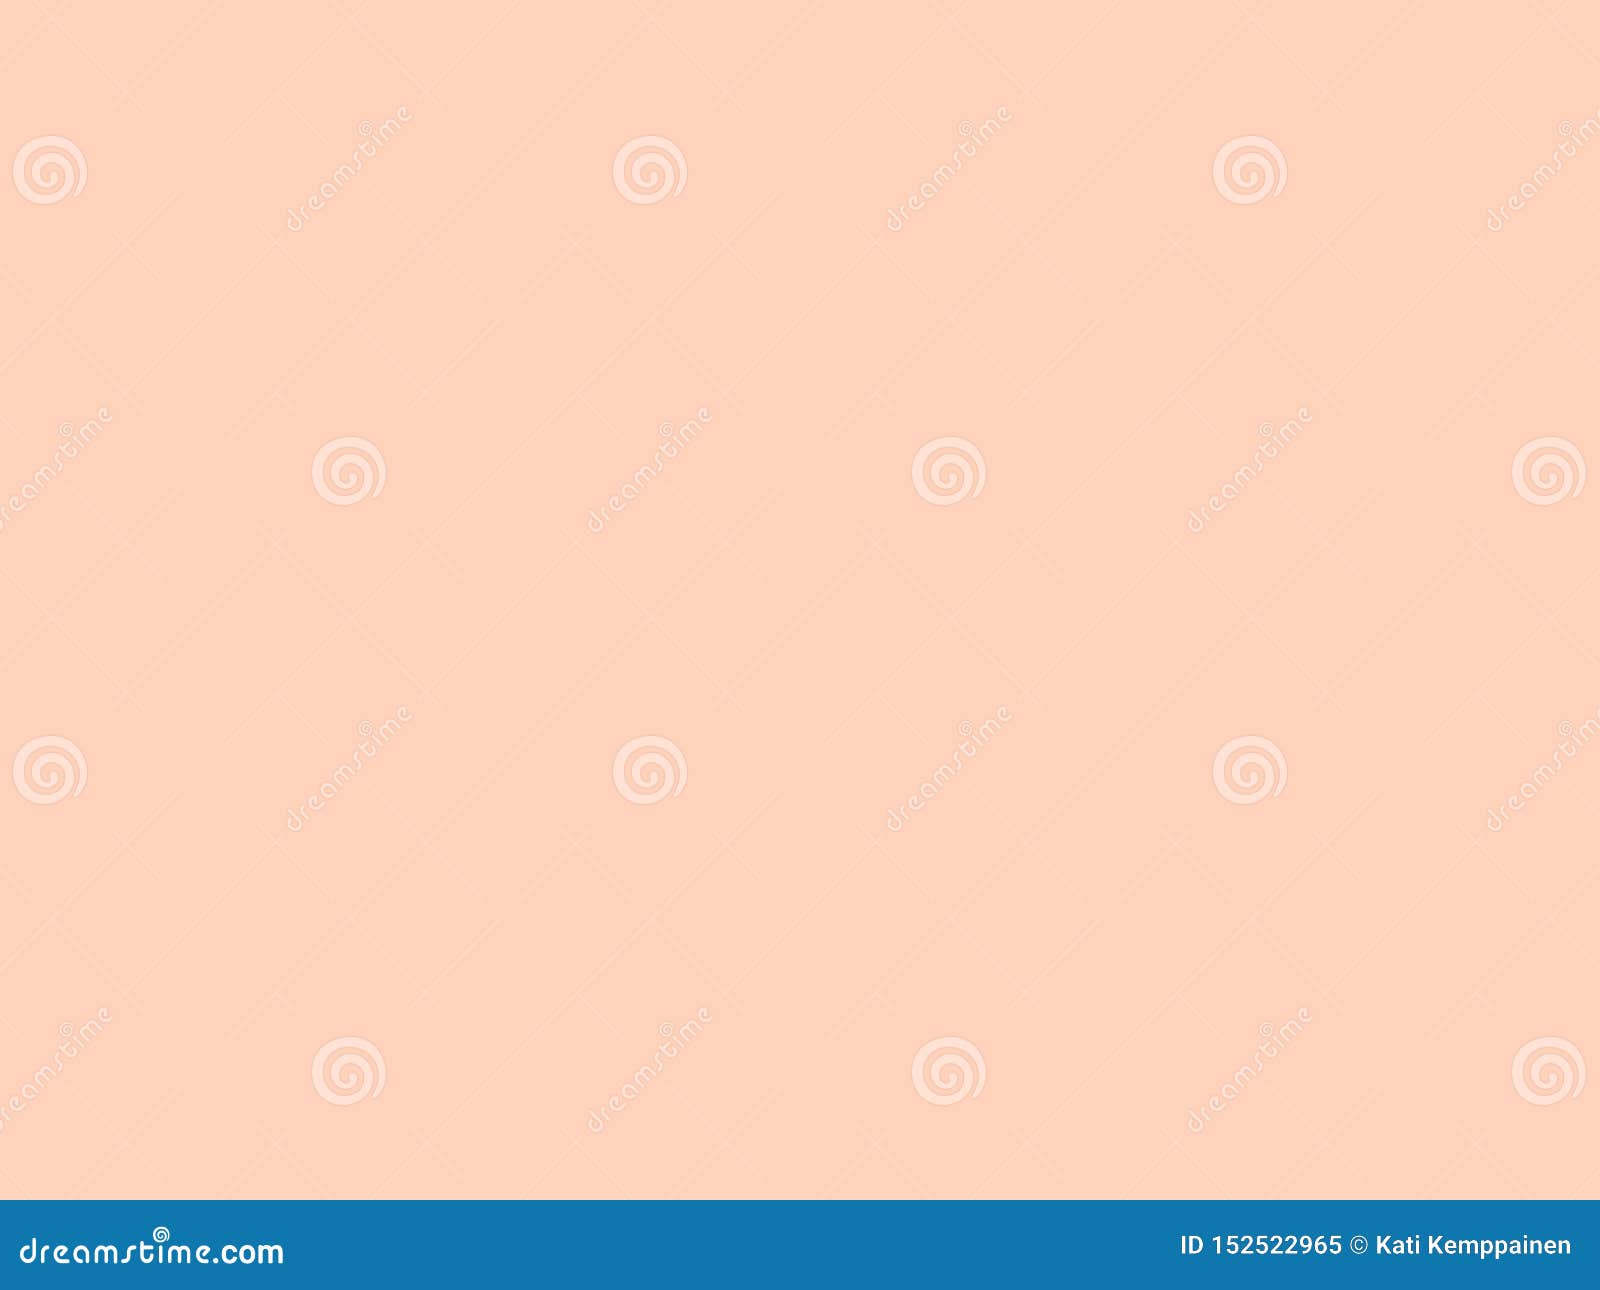 Plain pale pink background stock image. Image of empty - 152522965